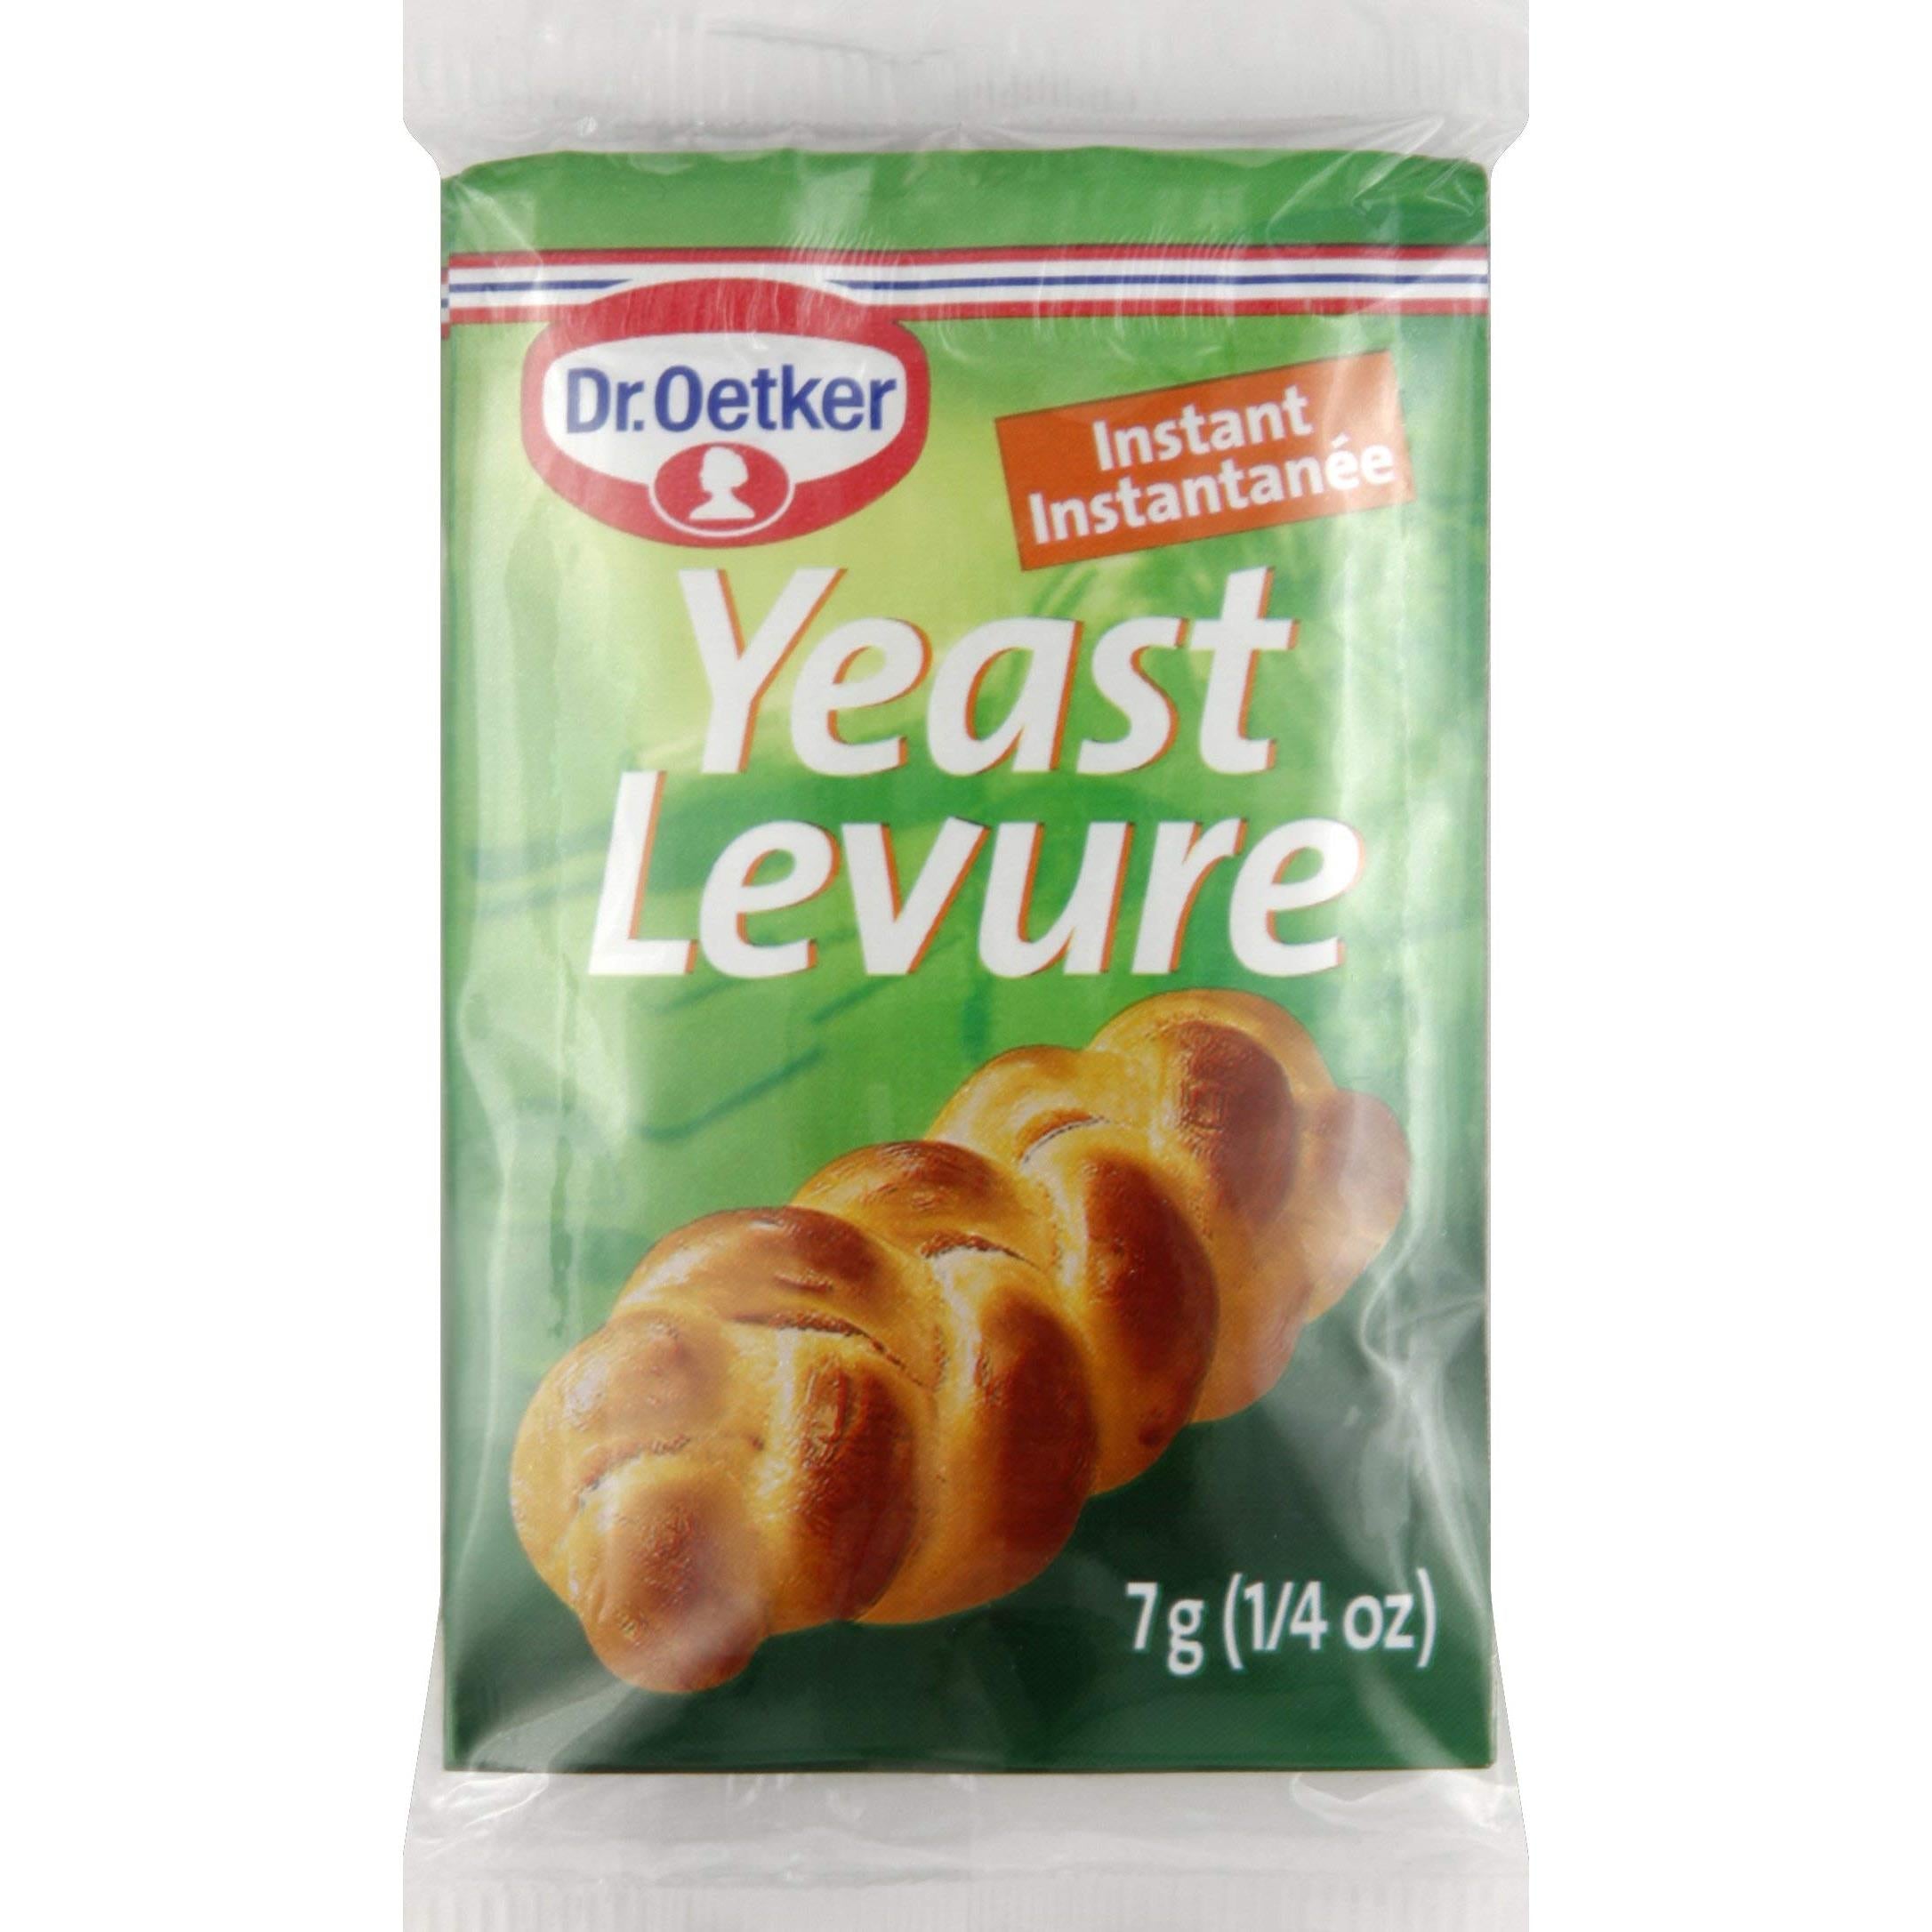 Dr. Oetker Yeast Levure Instant, 0.25-Ounce (Pack of 3)